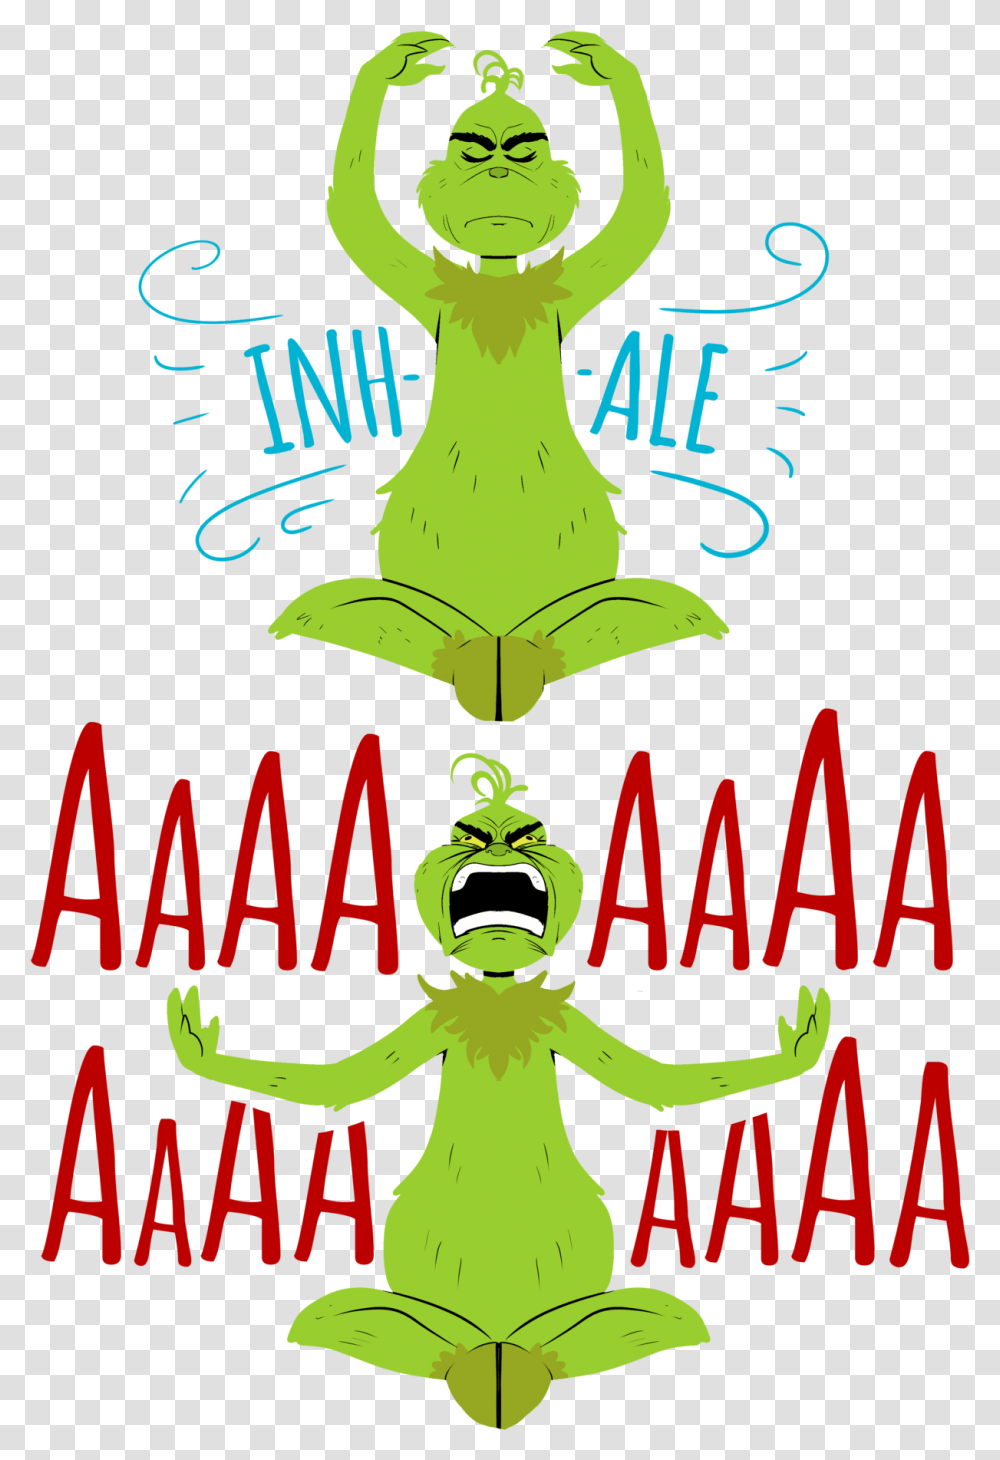 The Grinch Is Releasing Some Anxiety With Some Yogayou El Grinch Haciendo Yoga, Novel, Book, Poster, Advertisement Transparent Png